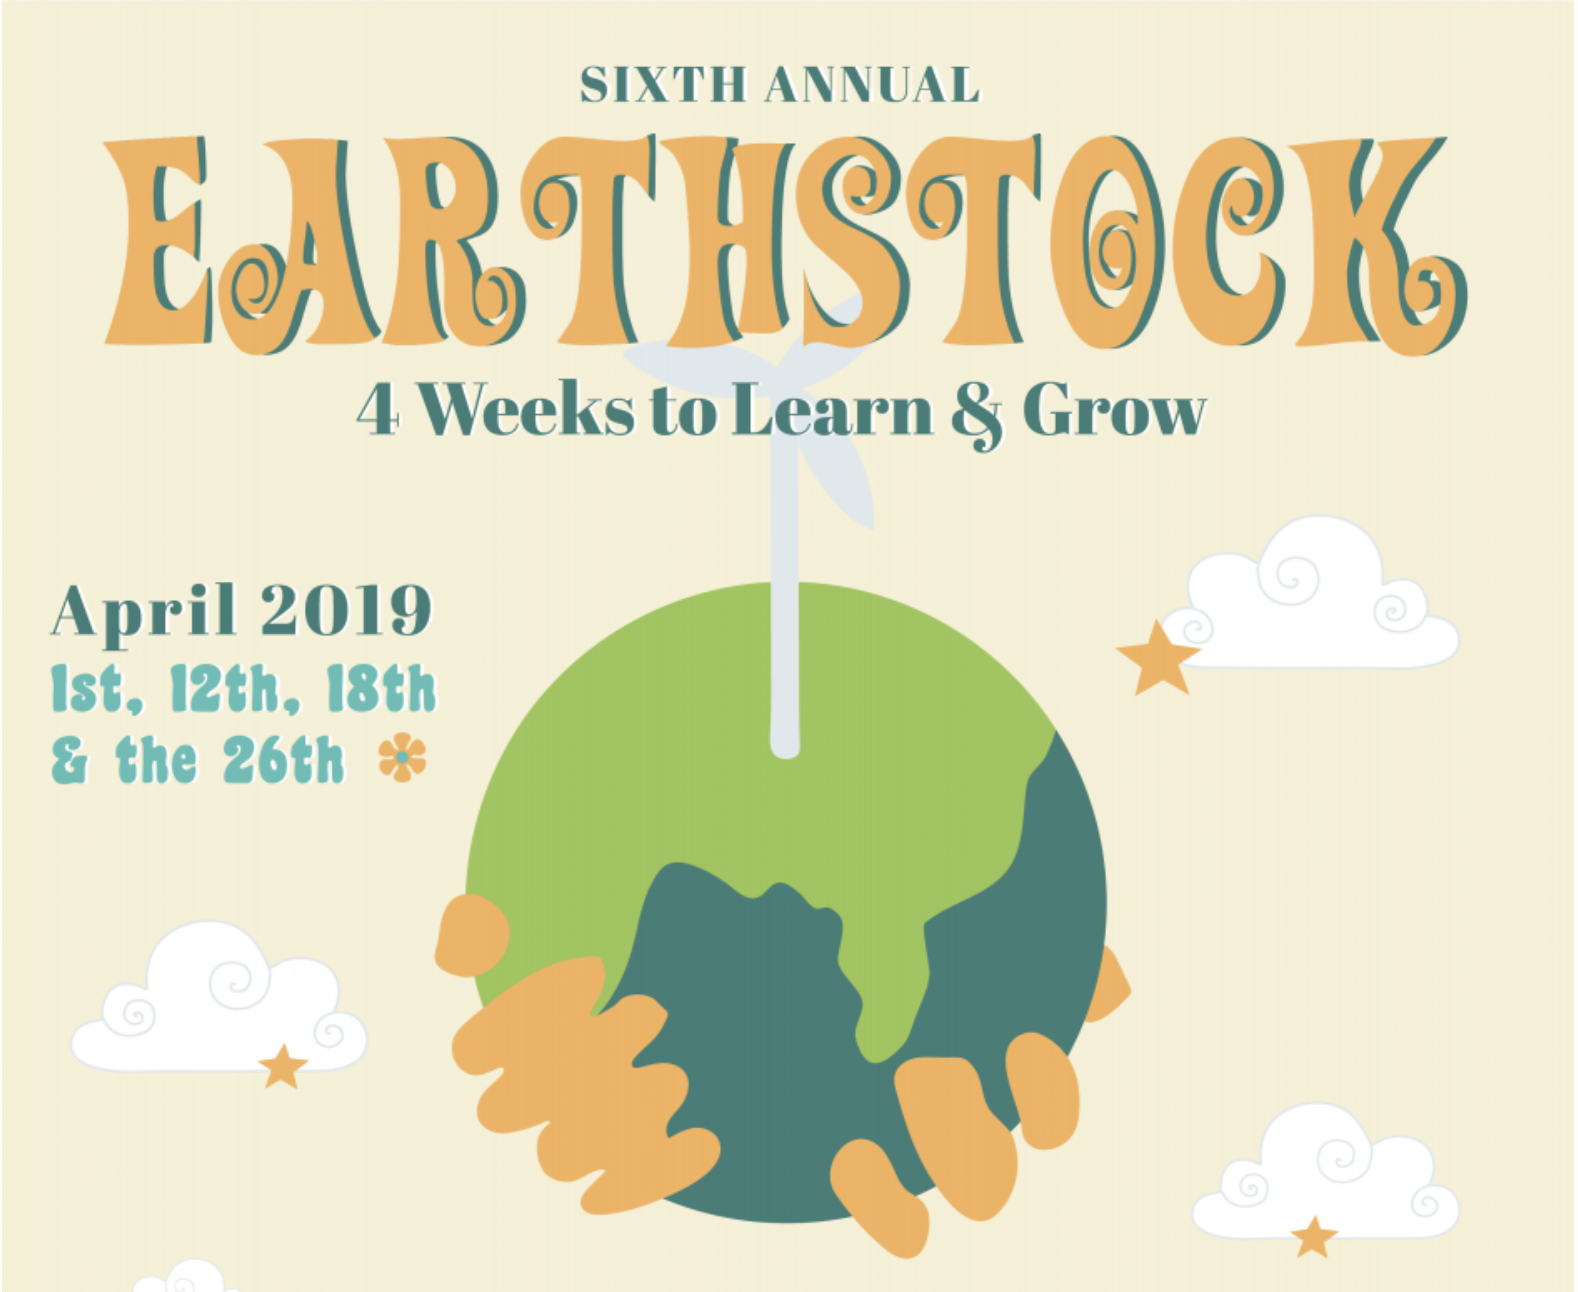 Submit your artwork by April 16 for the Earthstock Art Show.